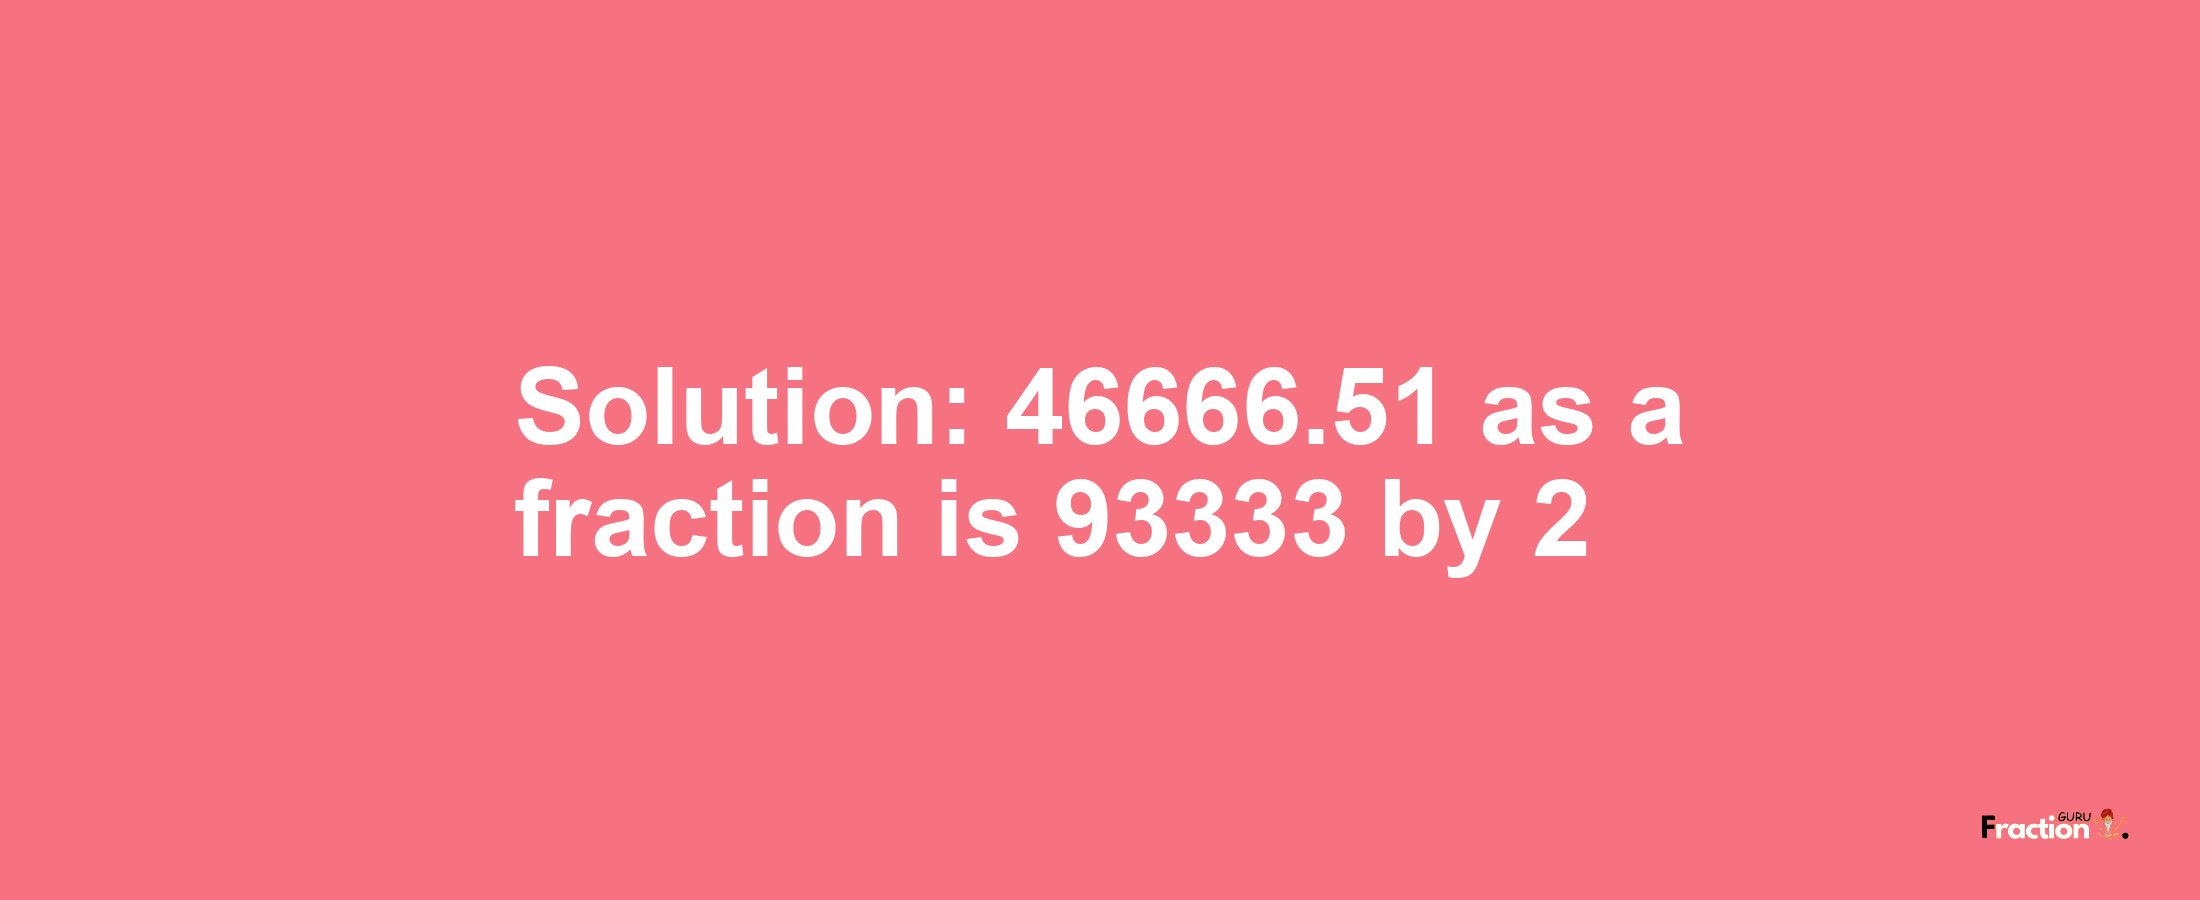 Solution:46666.51 as a fraction is 93333/2